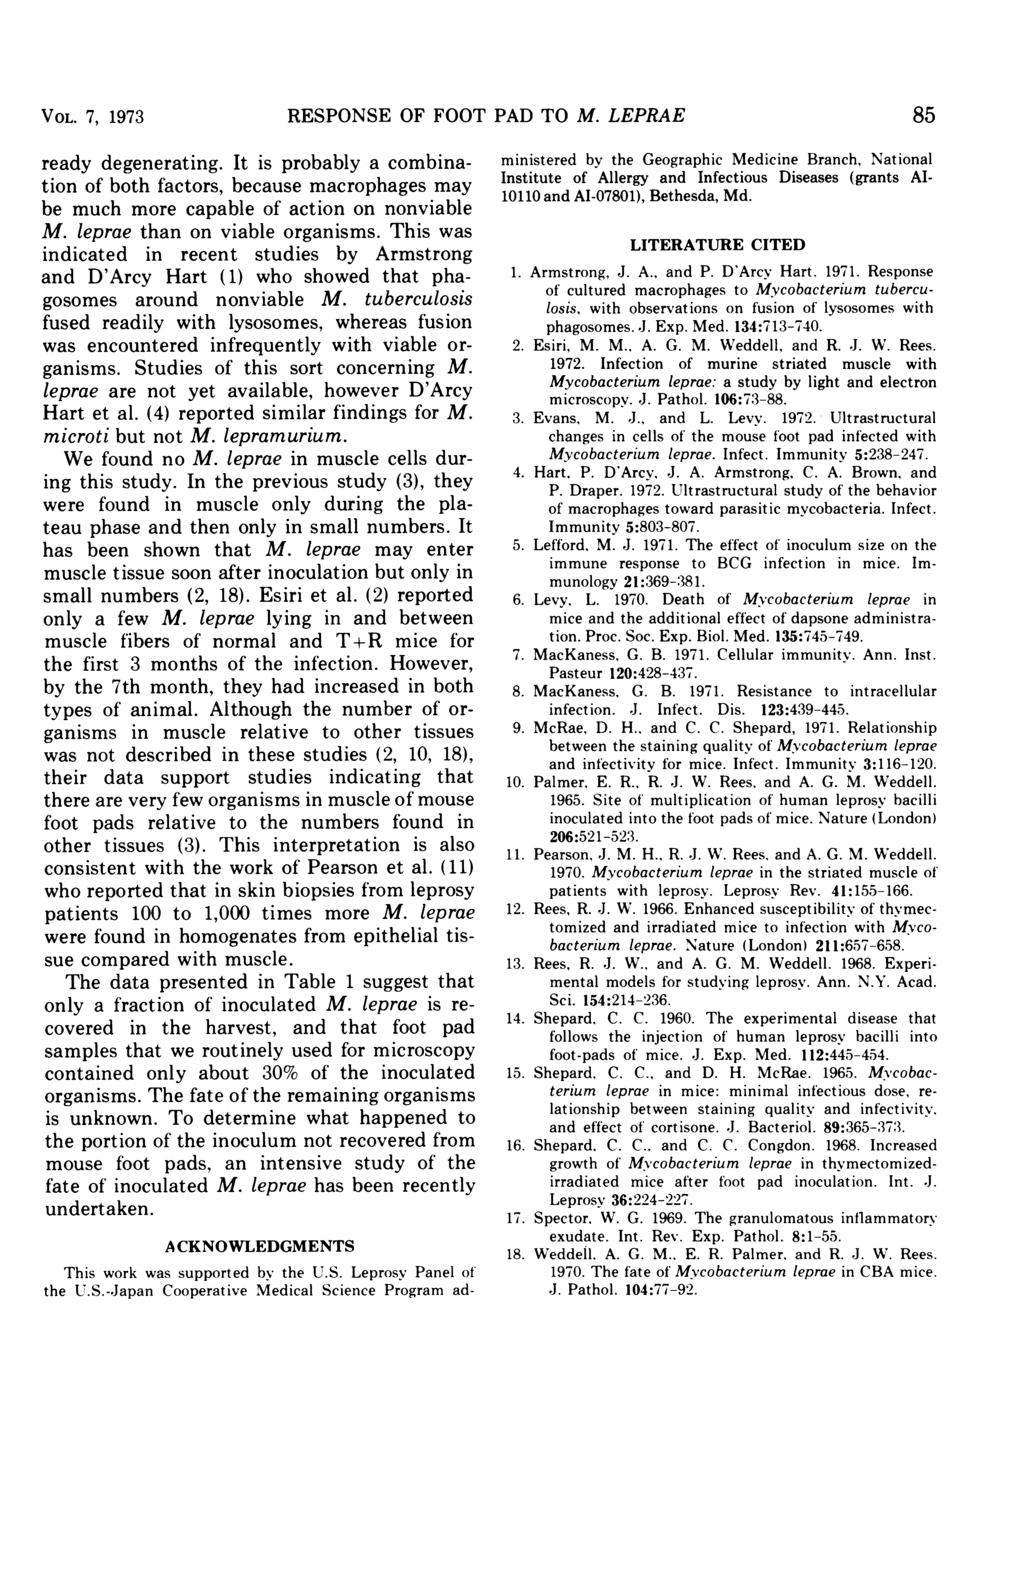 VOL. 7, 1973 RESPONSE OF FOOT PAD TO M. LEPRAE ready degenerating. It is probably a combination of both factors, because macrophages may be much more capable of action on nonviable M.